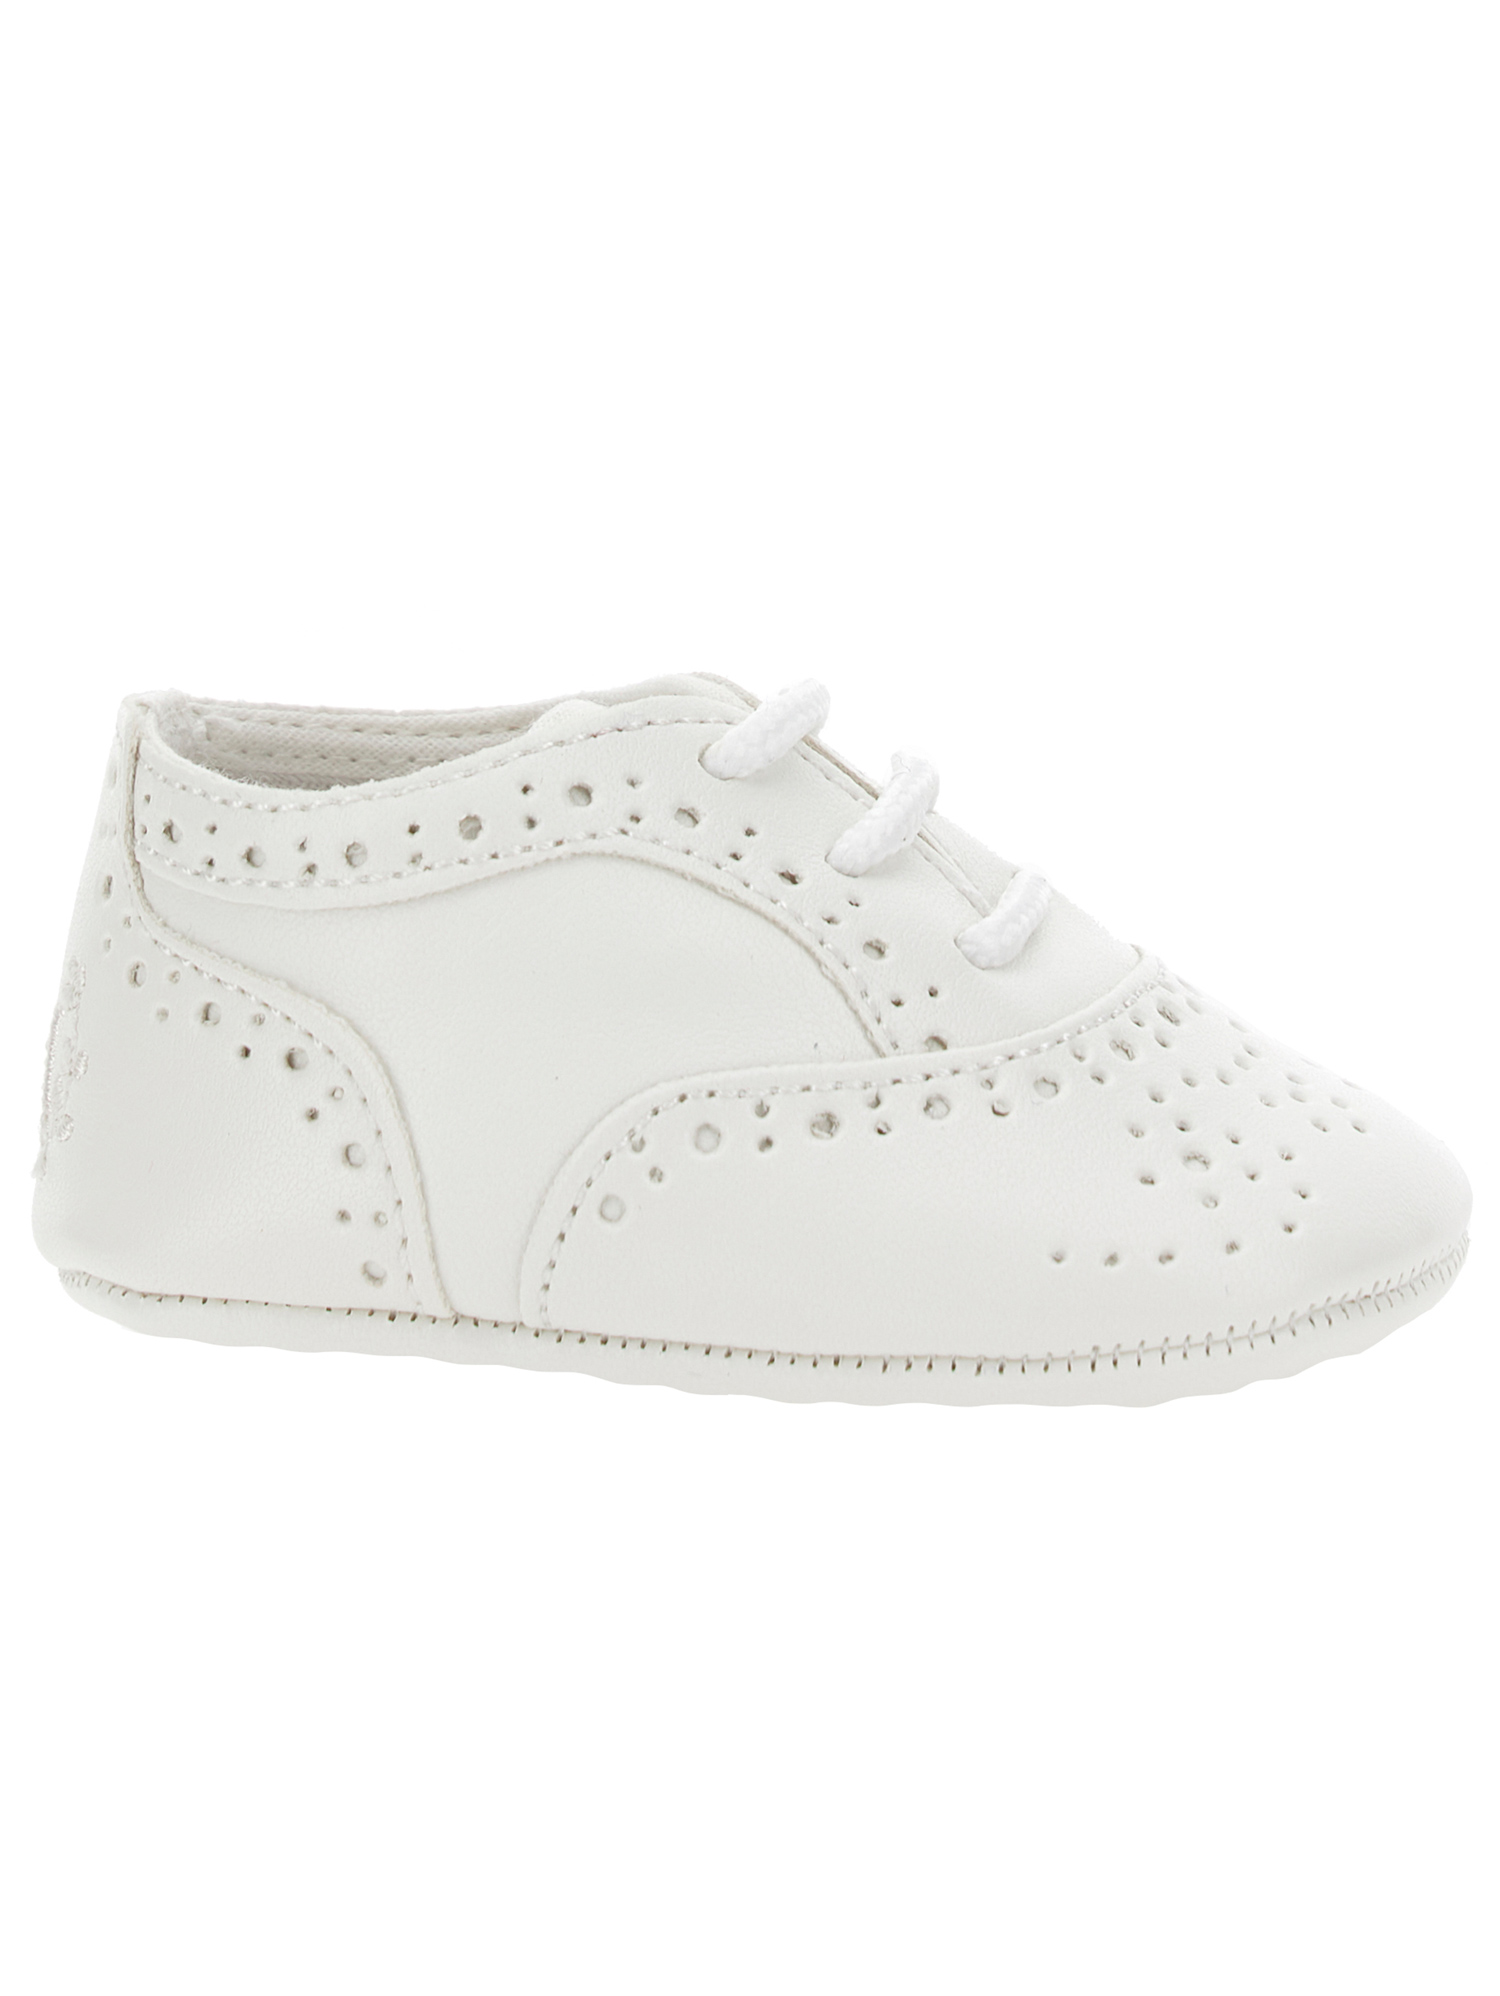 Monnalisa Lace-up Shoes In Cream